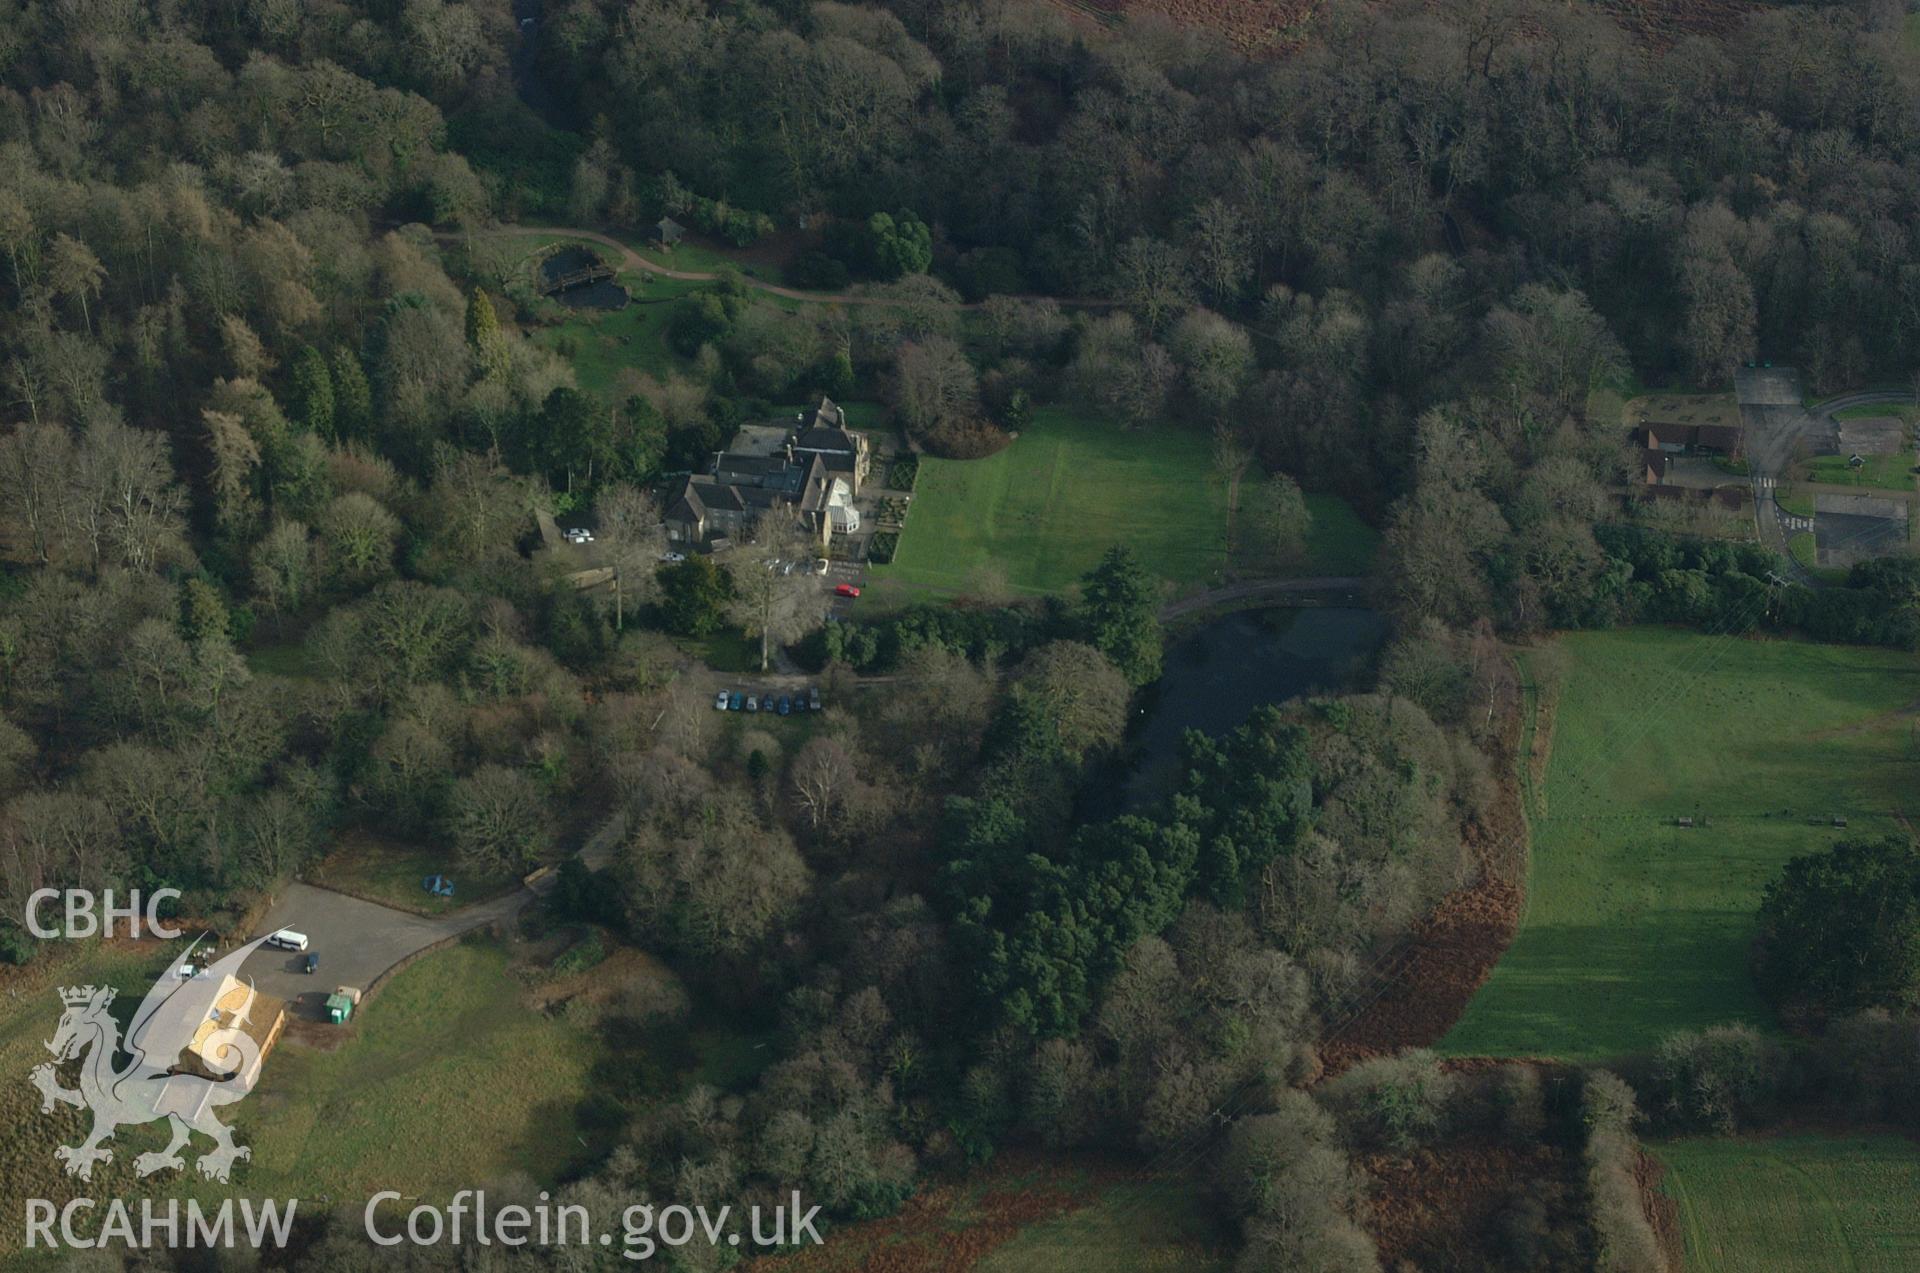 RCAHMW colour oblique aerial photograph of Bryngarw taken on 13/01/2005 by Toby Driver